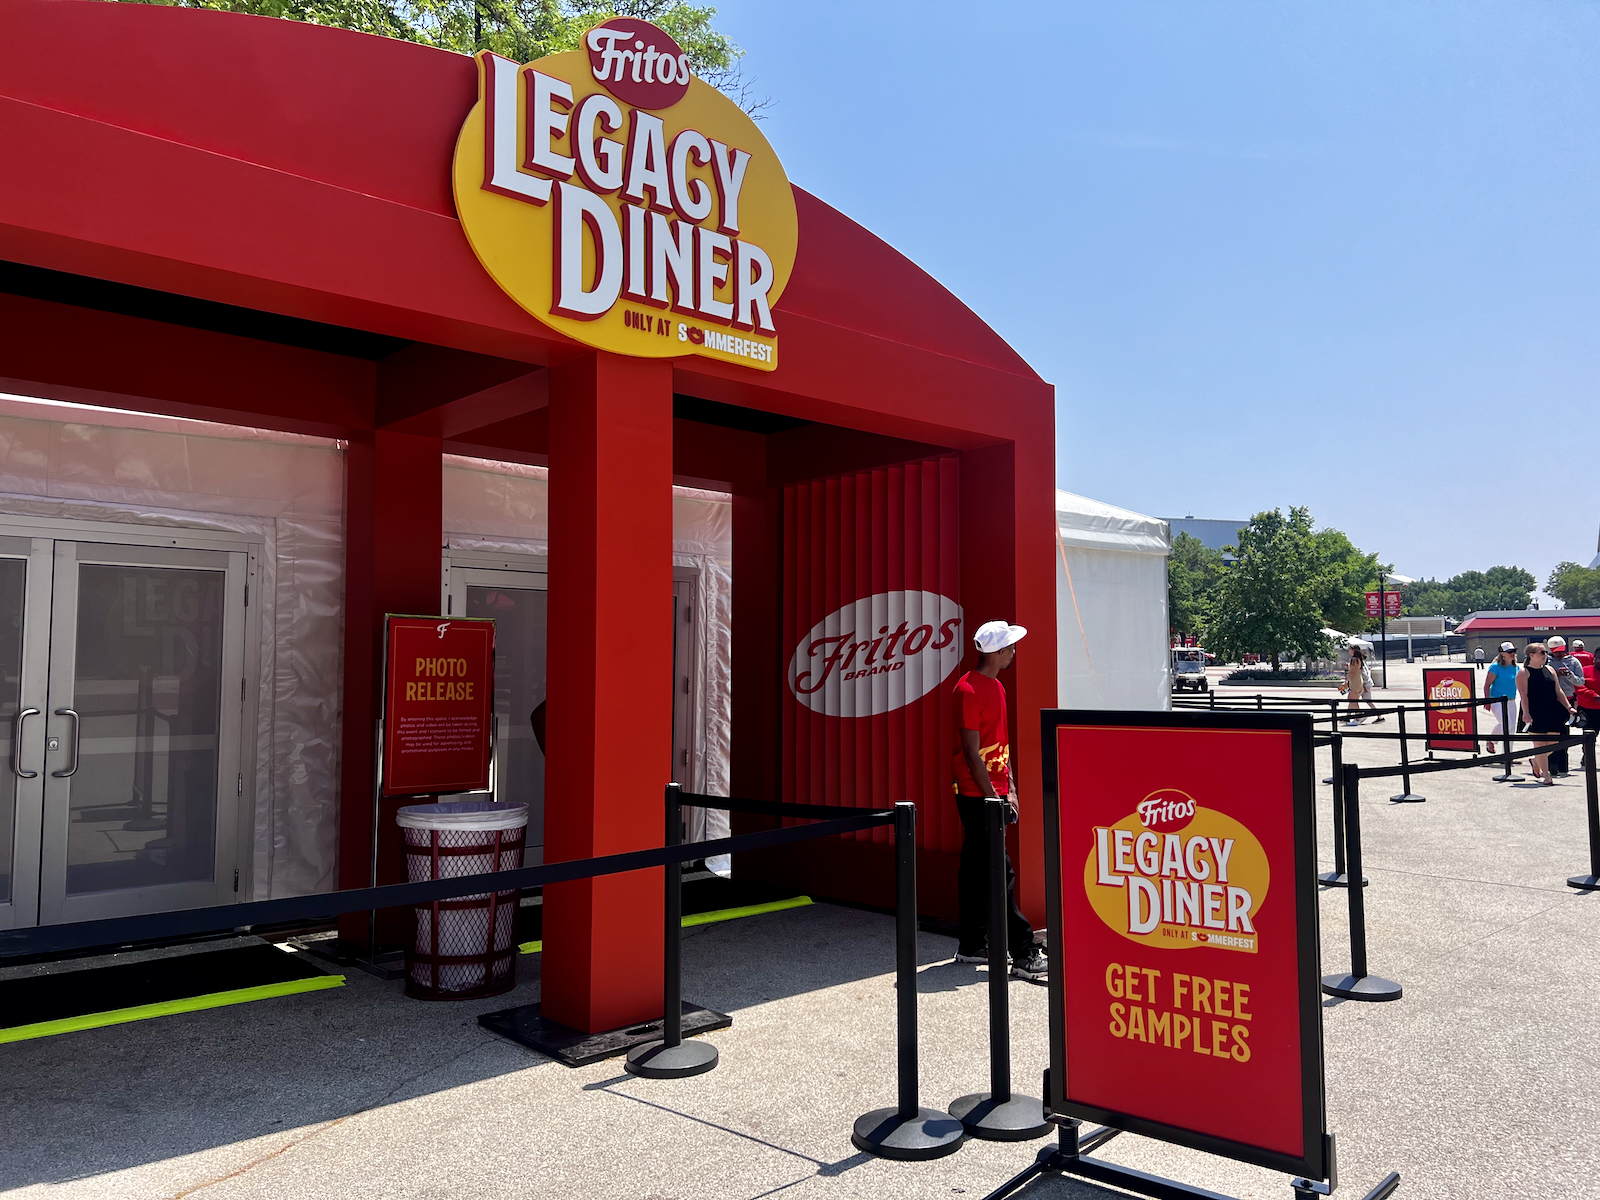 Exterior of Fritos Legacy Diner